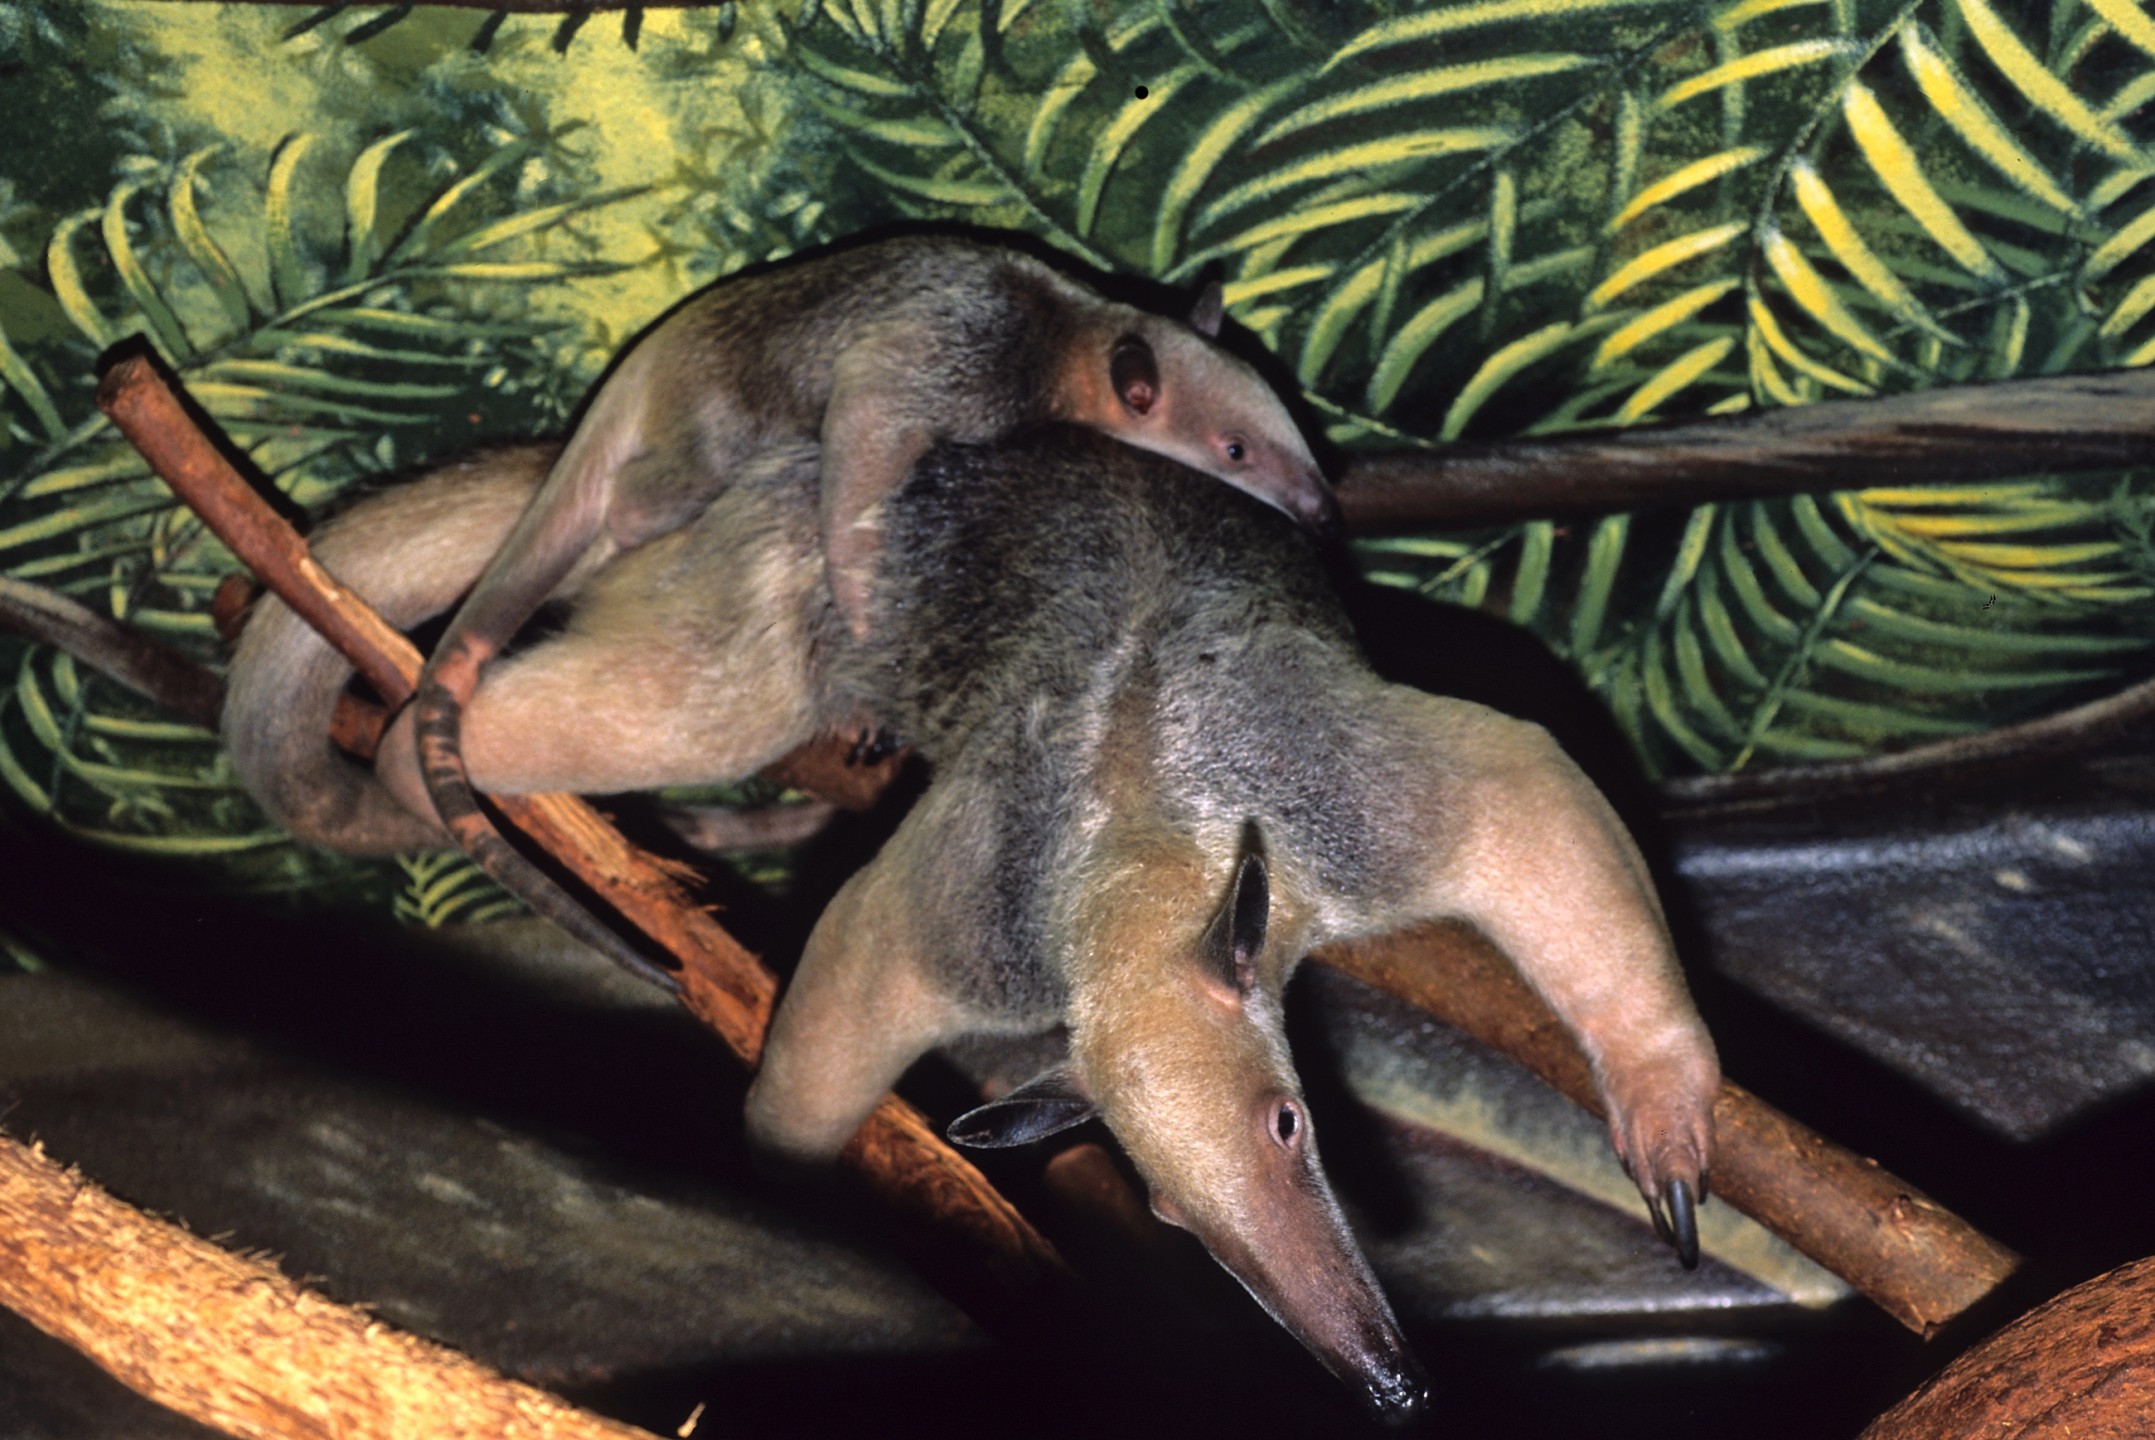 As anteaters do, the tamandua baby got around by hitching a ride on mom's back, using strong feet and a prehensile tail to hang on. 